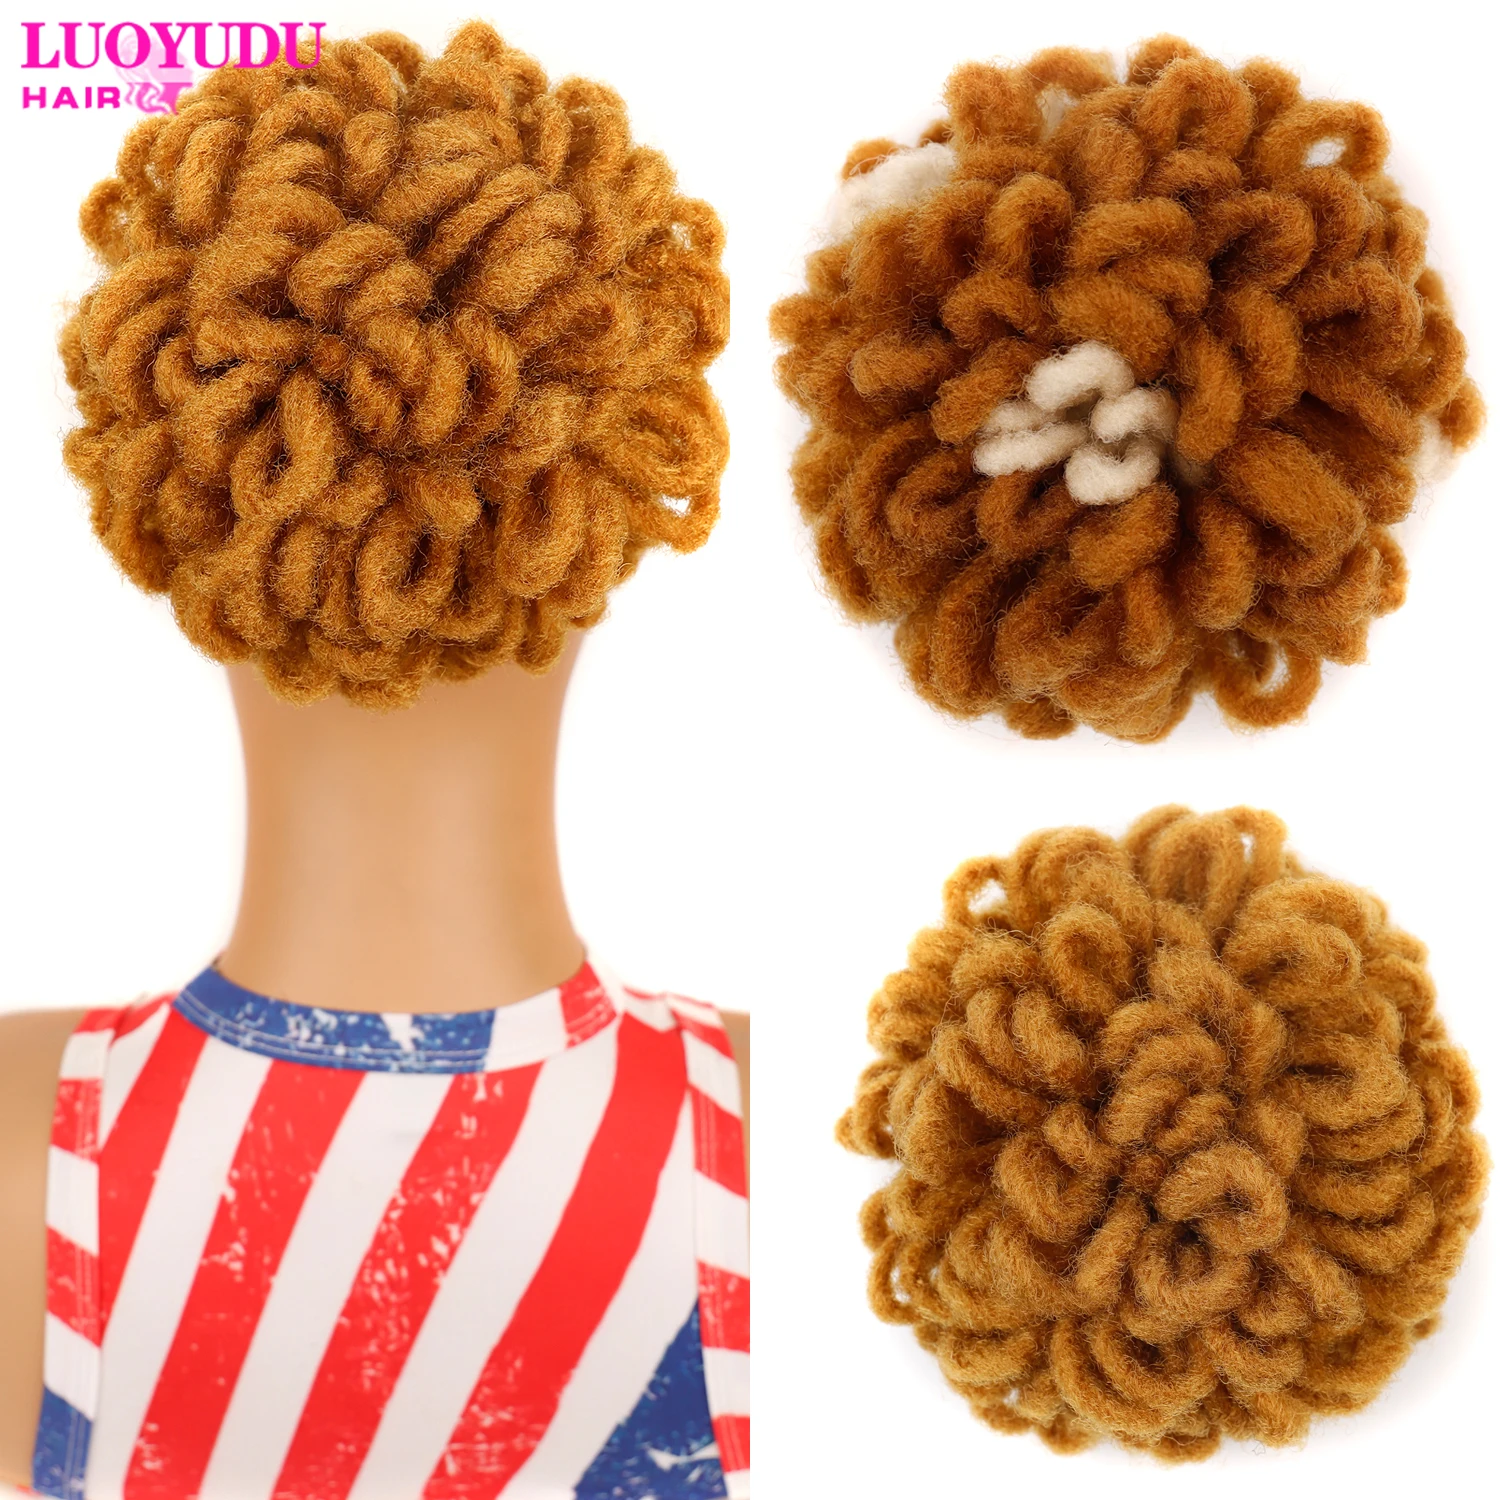 Synthetic Chignon Dreadlocks Curly Massy Updo for Women Black Hair Bun Extensions Fasten by Rubber Band Clip-on Hair Luoyudu